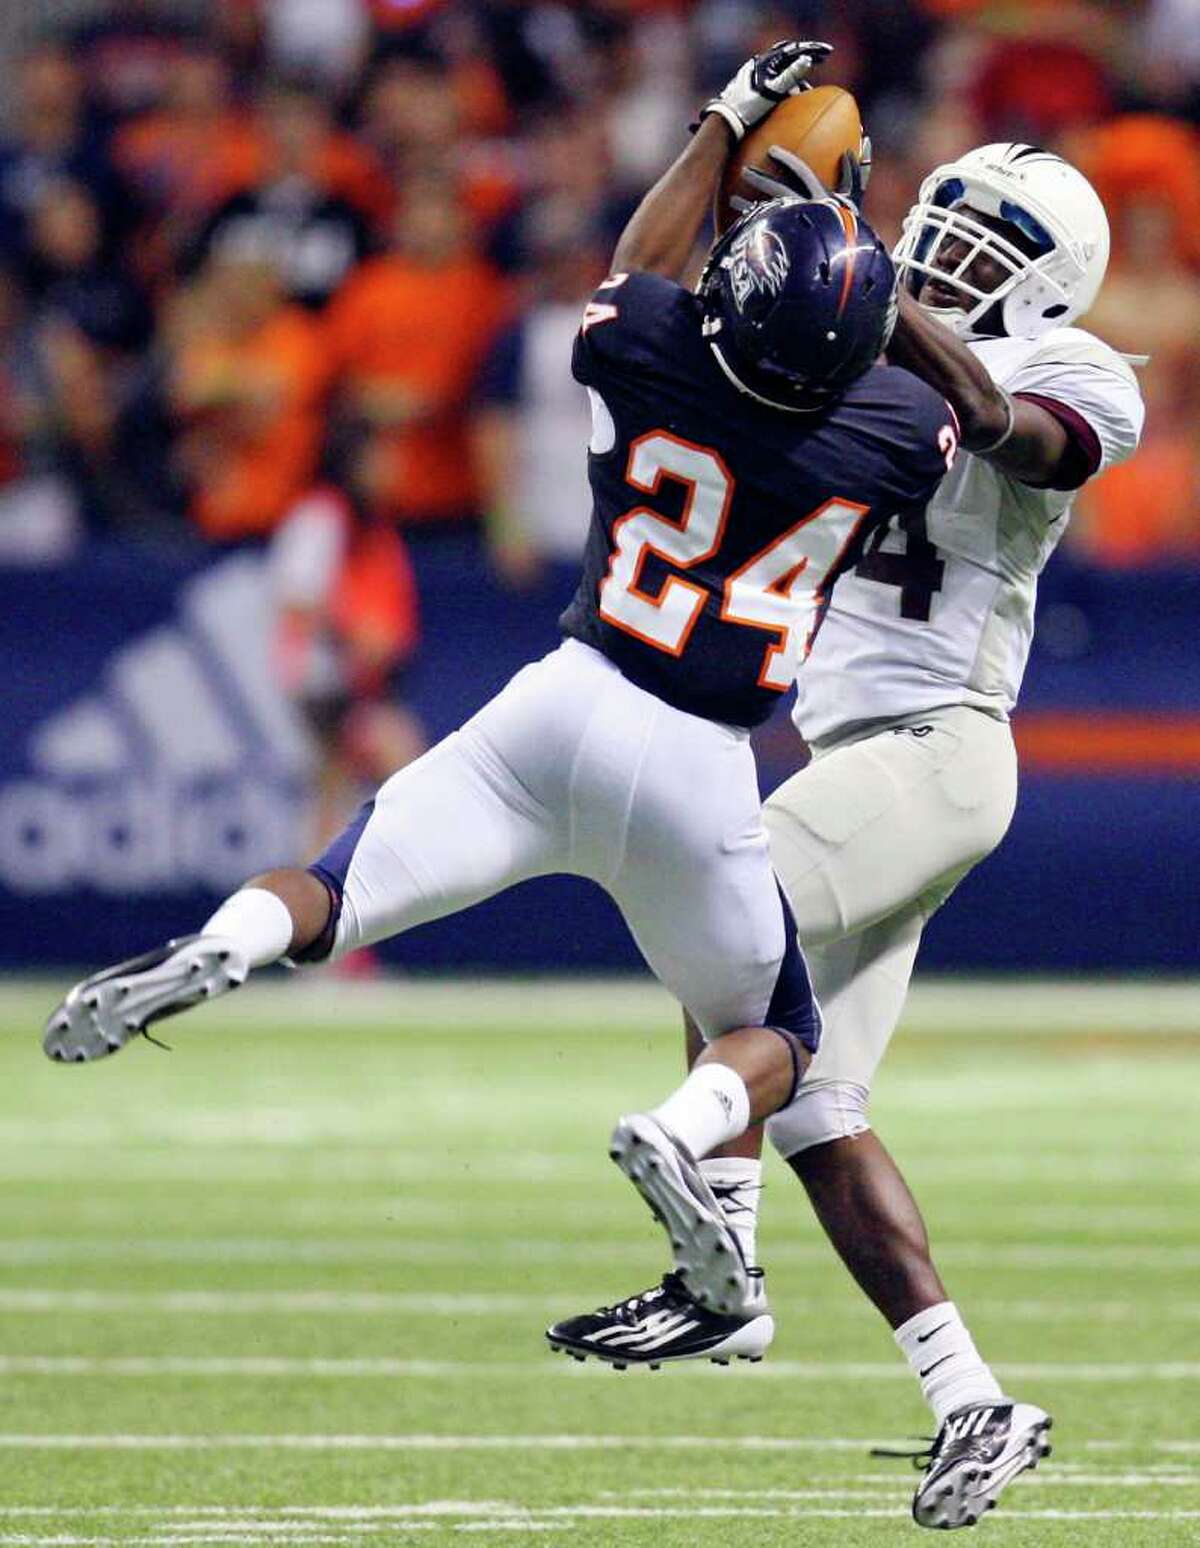 UTSA’s Darrien Starling, left, intercepts the McMurry University ball at the Alamodome. Not all the drama was on the football field, though. A reader complains that a bicycle officer accused him of ticket scalping and proceeded to “grope” his pockets, finding nothing.